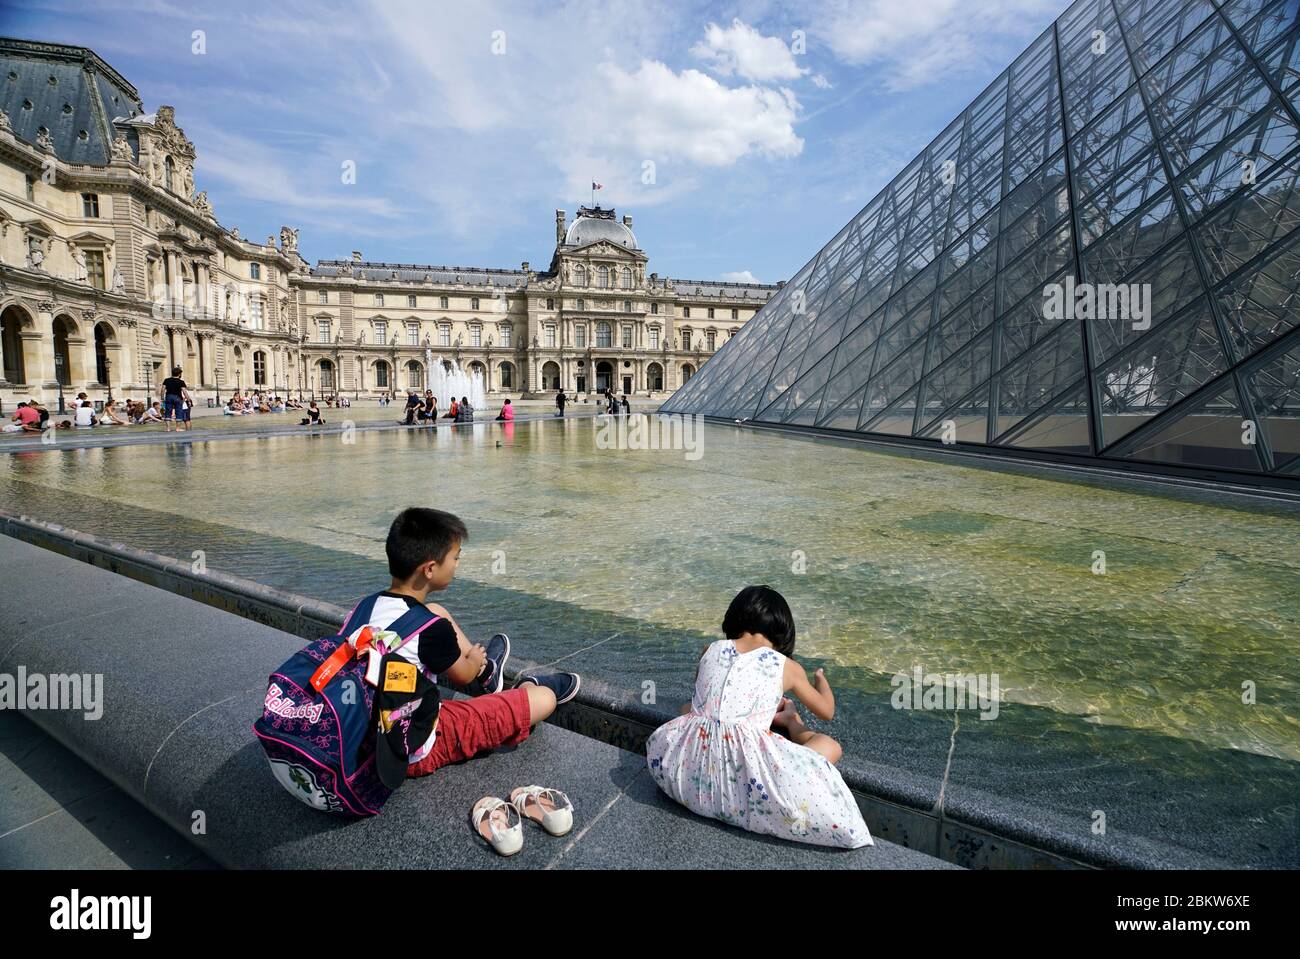 Napoleon Courtyard with I.M.Pei designed glass Pyramid in Louvre Palace museum.Paris.France Stock Photo